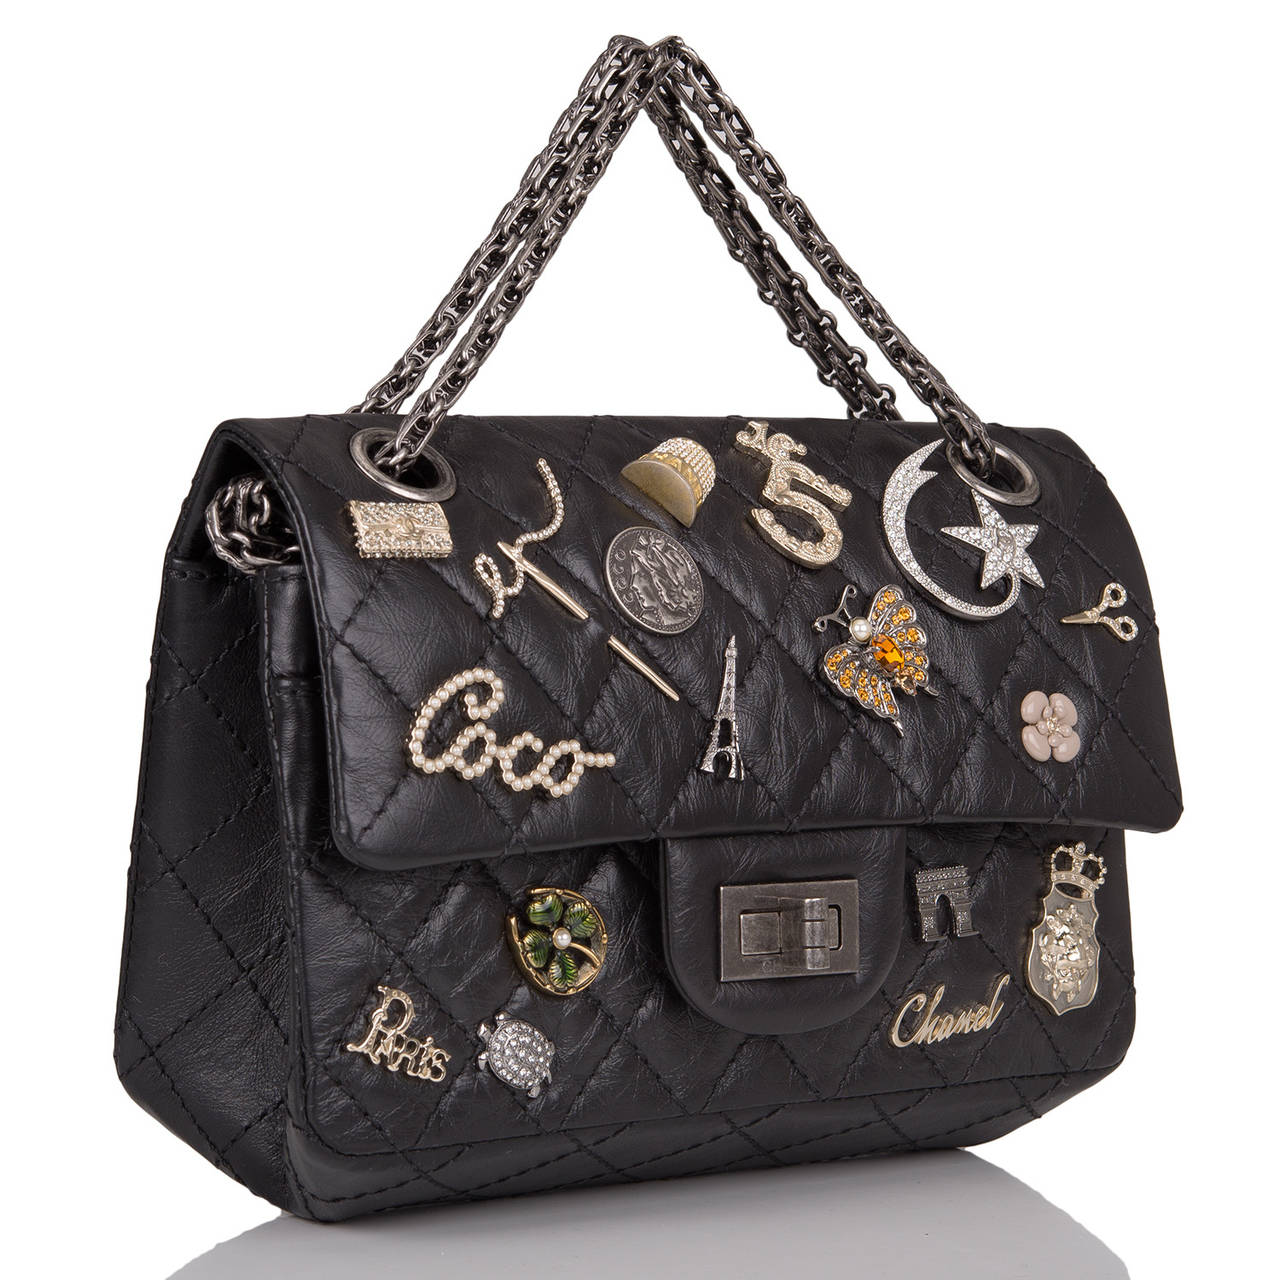 This Limited Edition Chanel Lucky Charm Reissue 2.55 bag in black aged calfskin leather with aged ruthenium hardware in size 224. This embellished Chanel bag features 21 iconic Chanel charms, front flap with Mademoiselle turnlock closure, a half